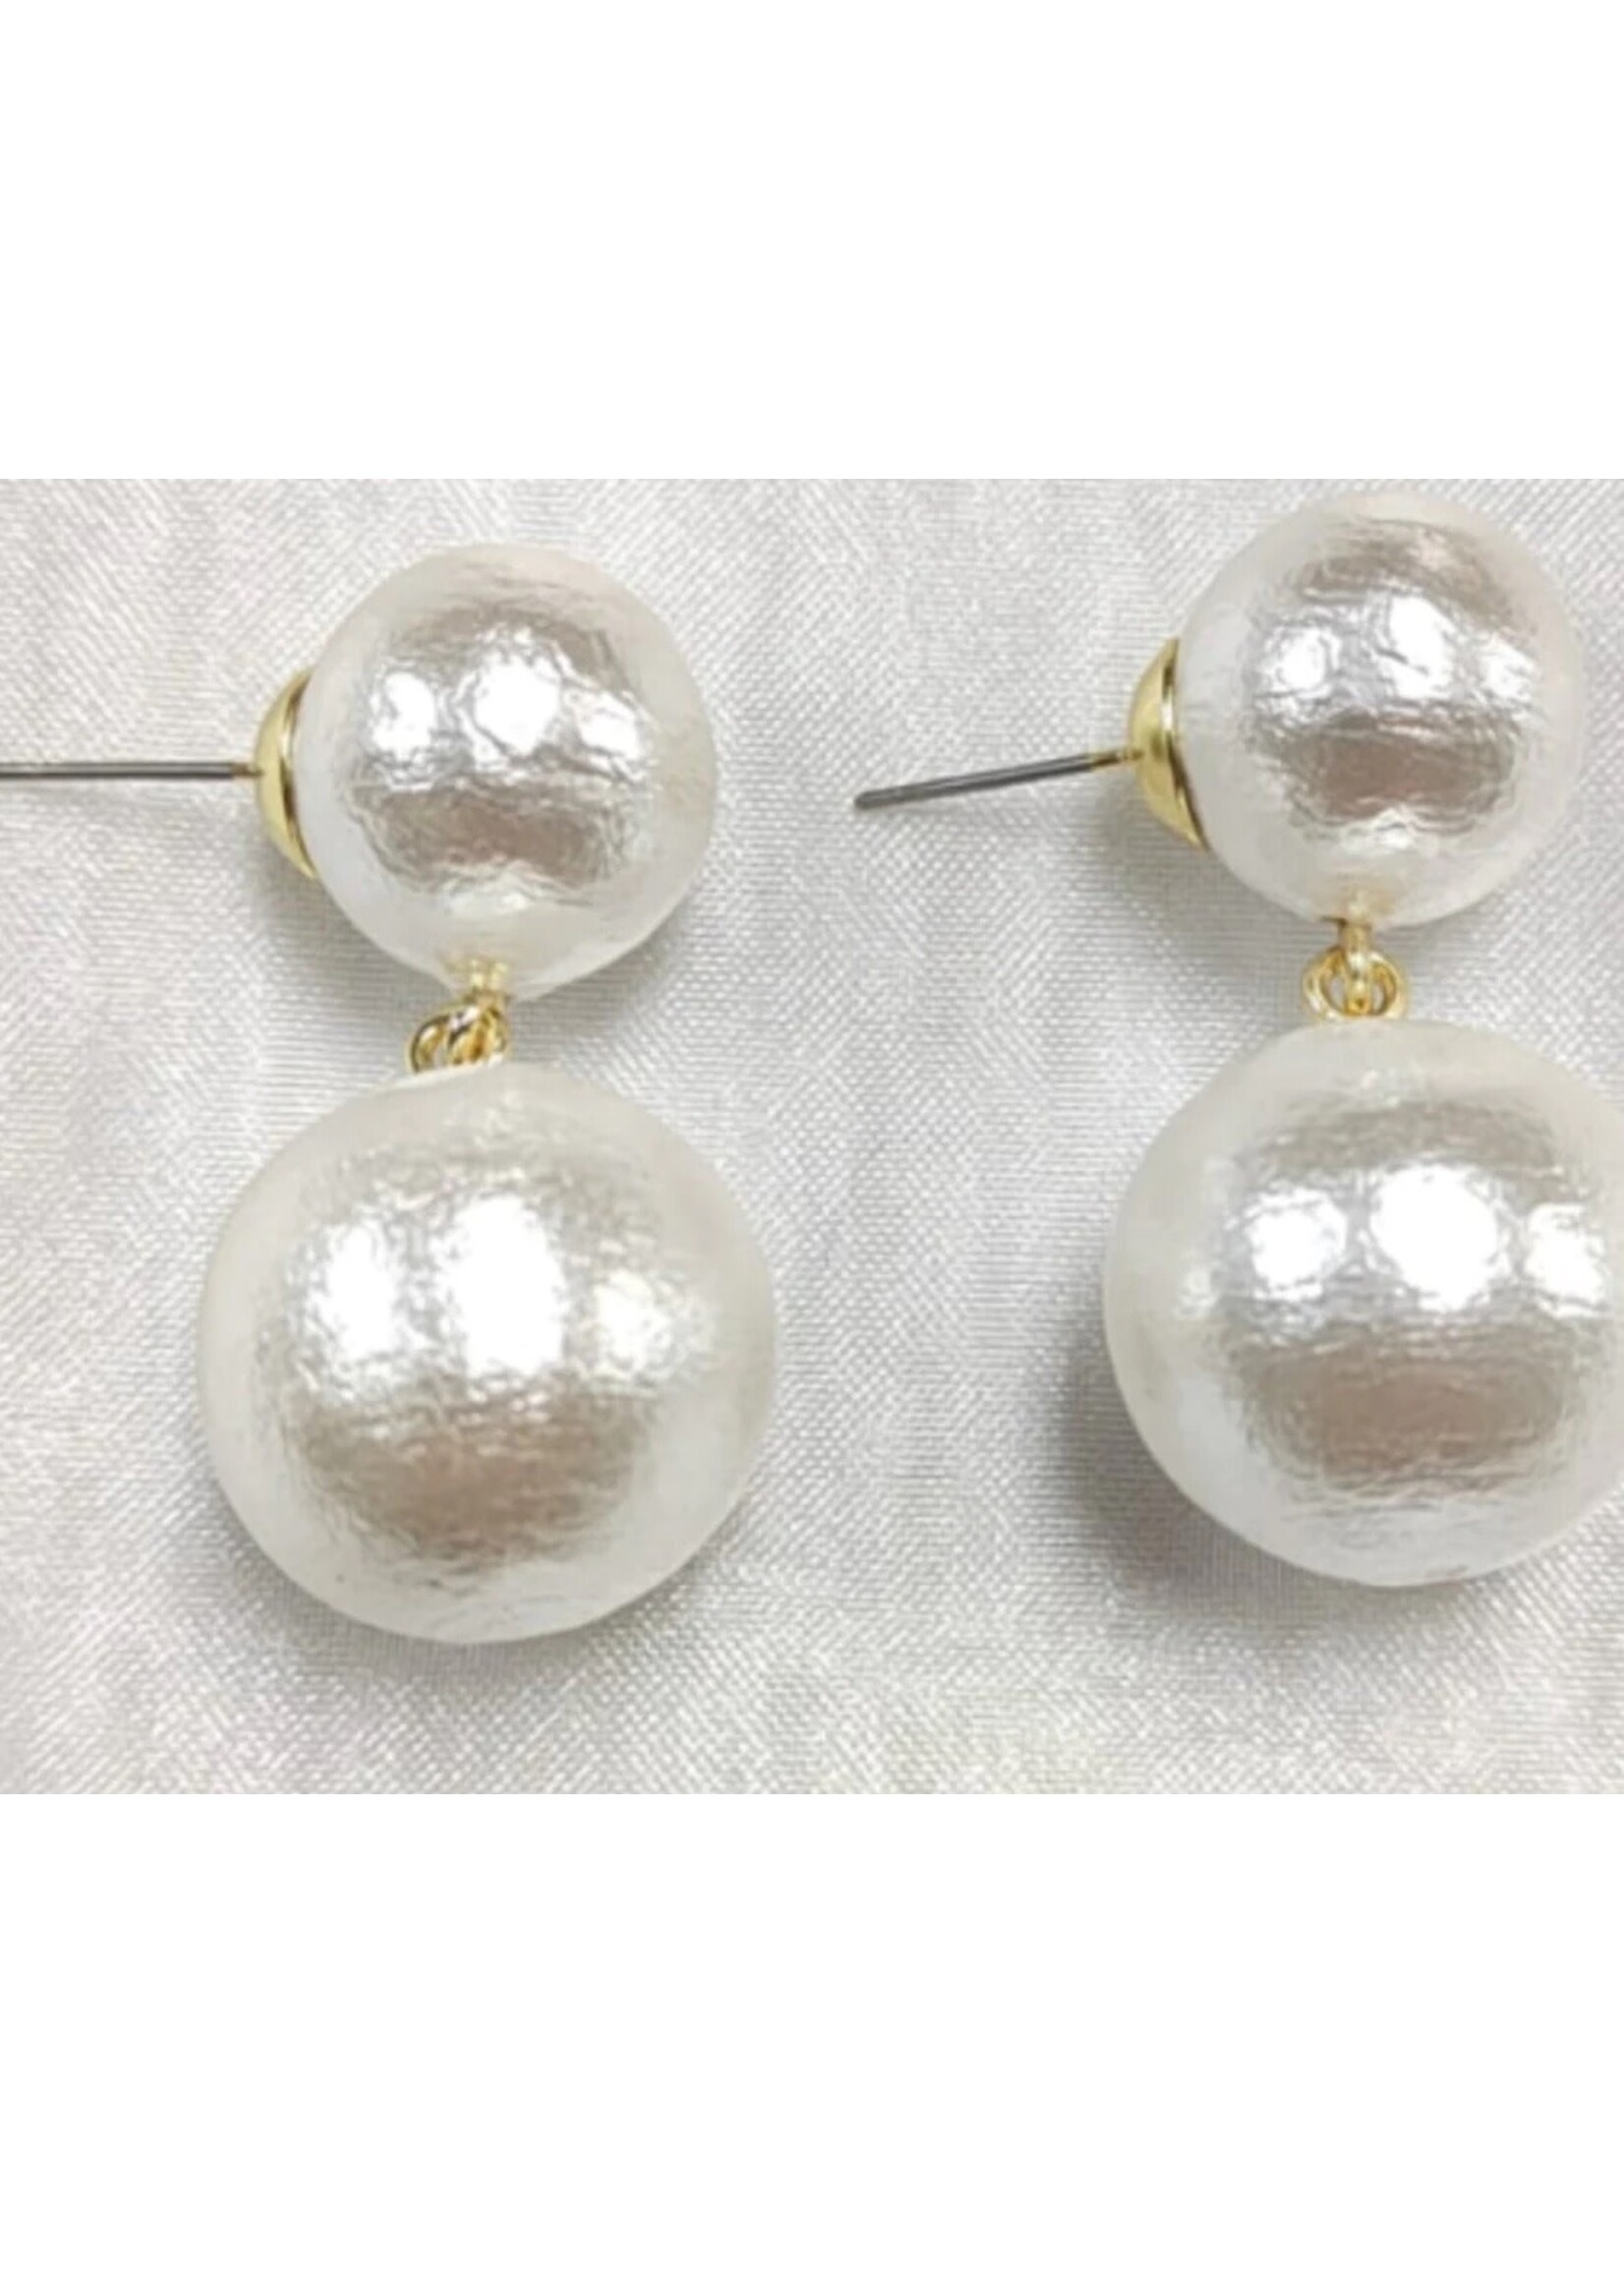 Brianna Cannon PEARL DOUBLE DROP EARRINGS